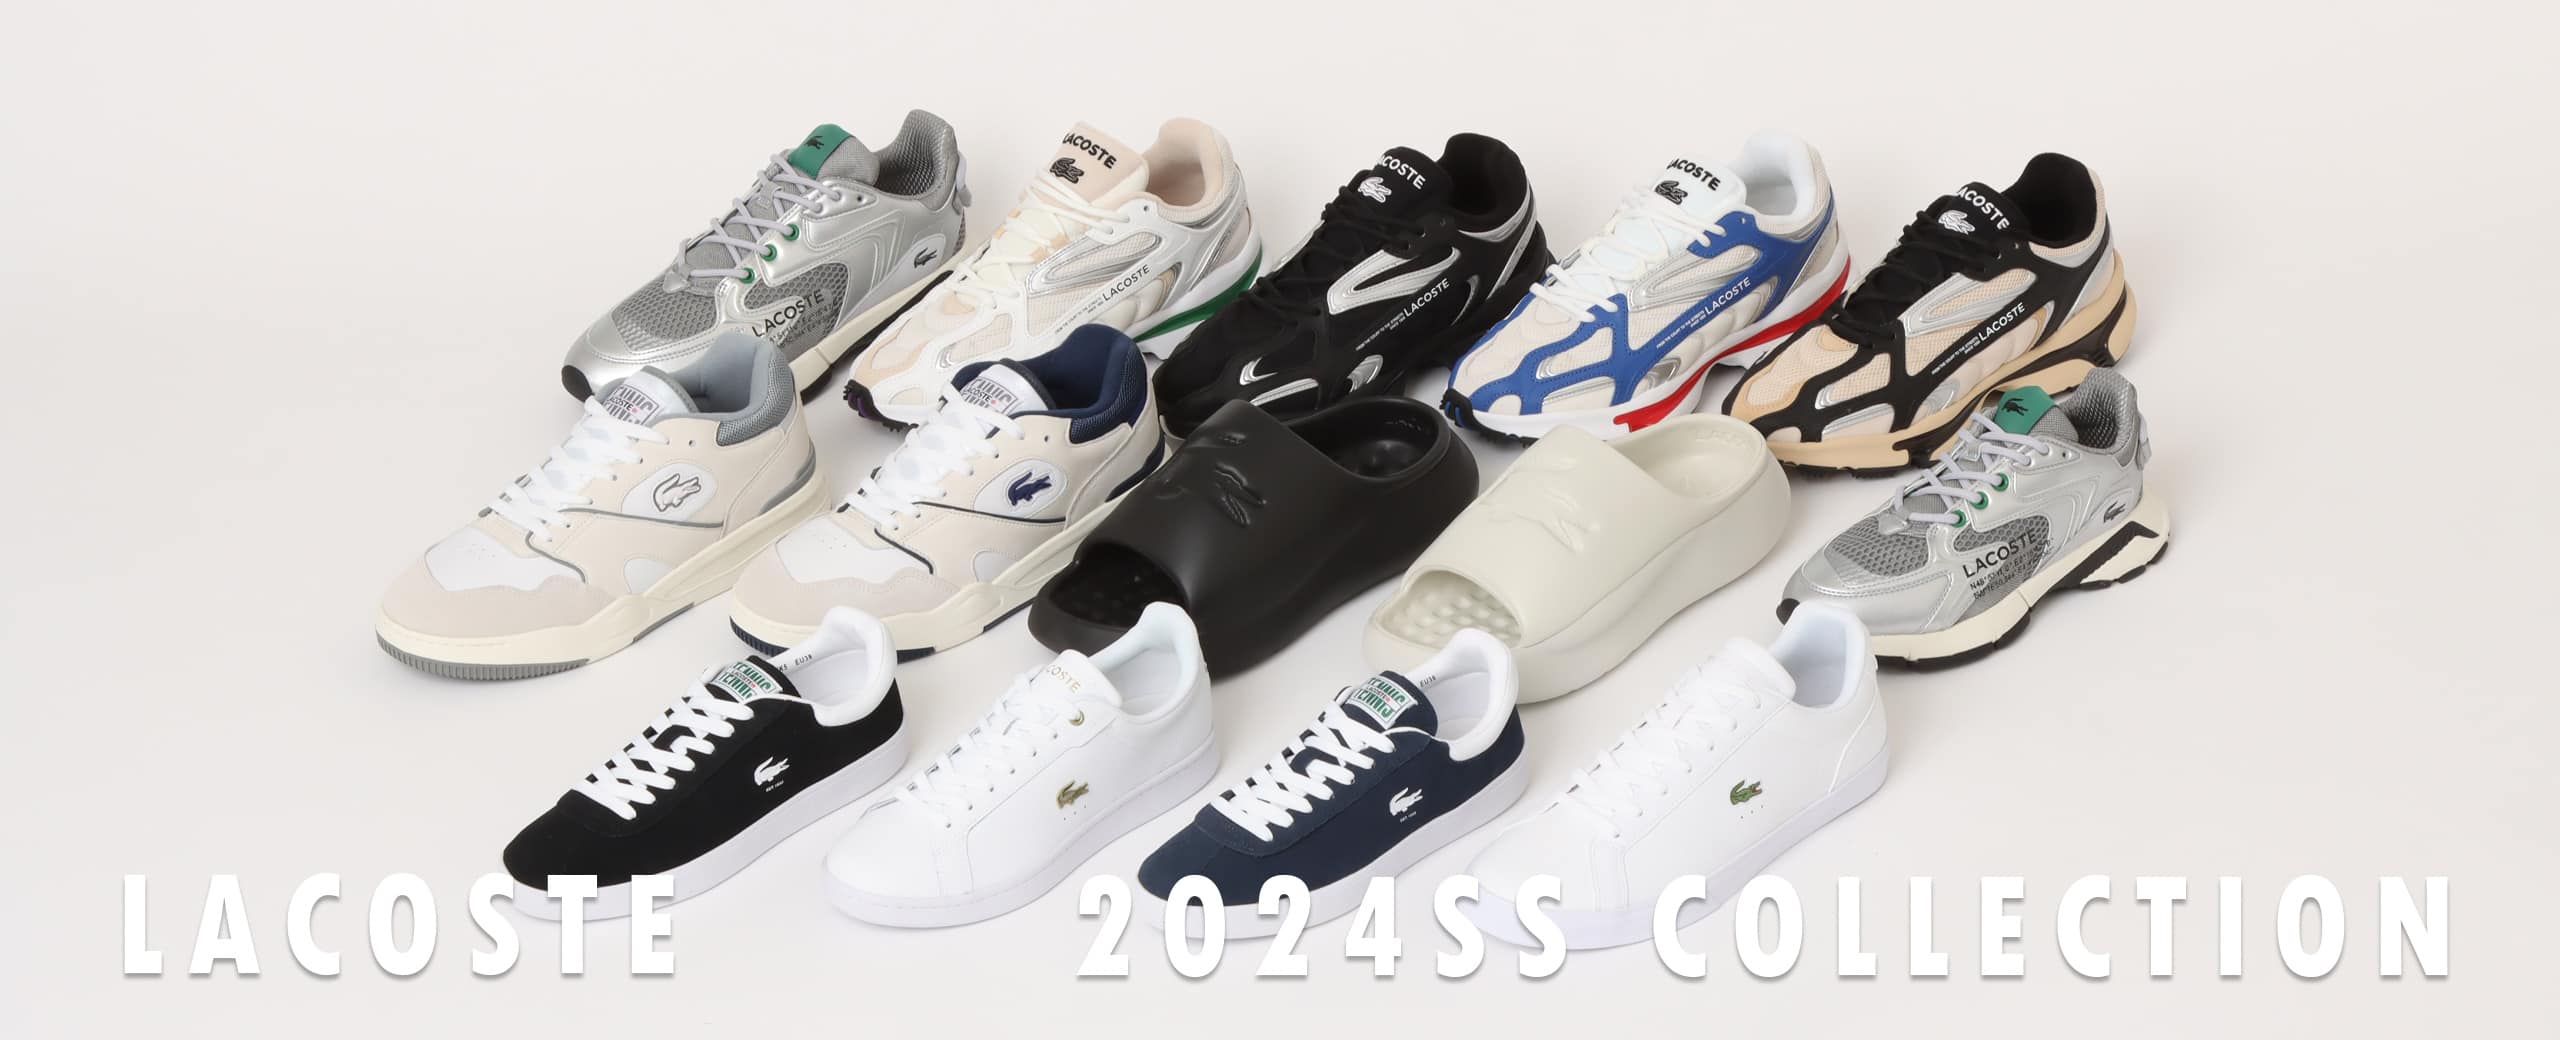 "LACOSTE 2024SS COLLECTION"